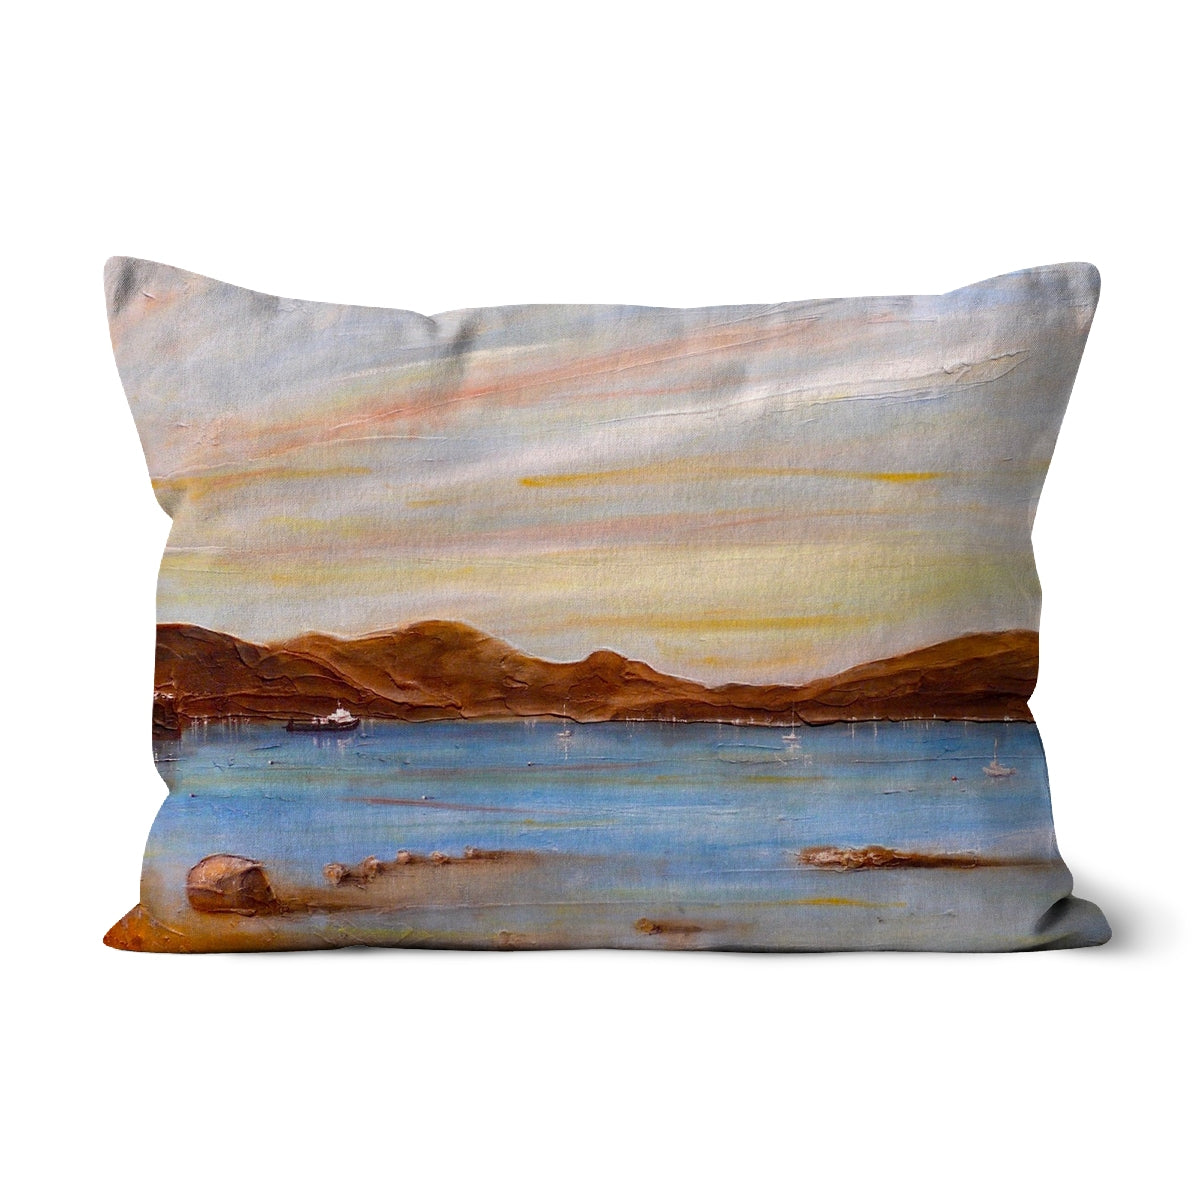 The Last Ferry To Dunoon Art Gifts Cushion-Cushions-River Clyde Art Gallery-Faux Suede-19"x13"-Paintings, Prints, Homeware, Art Gifts From Scotland By Scottish Artist Kevin Hunter